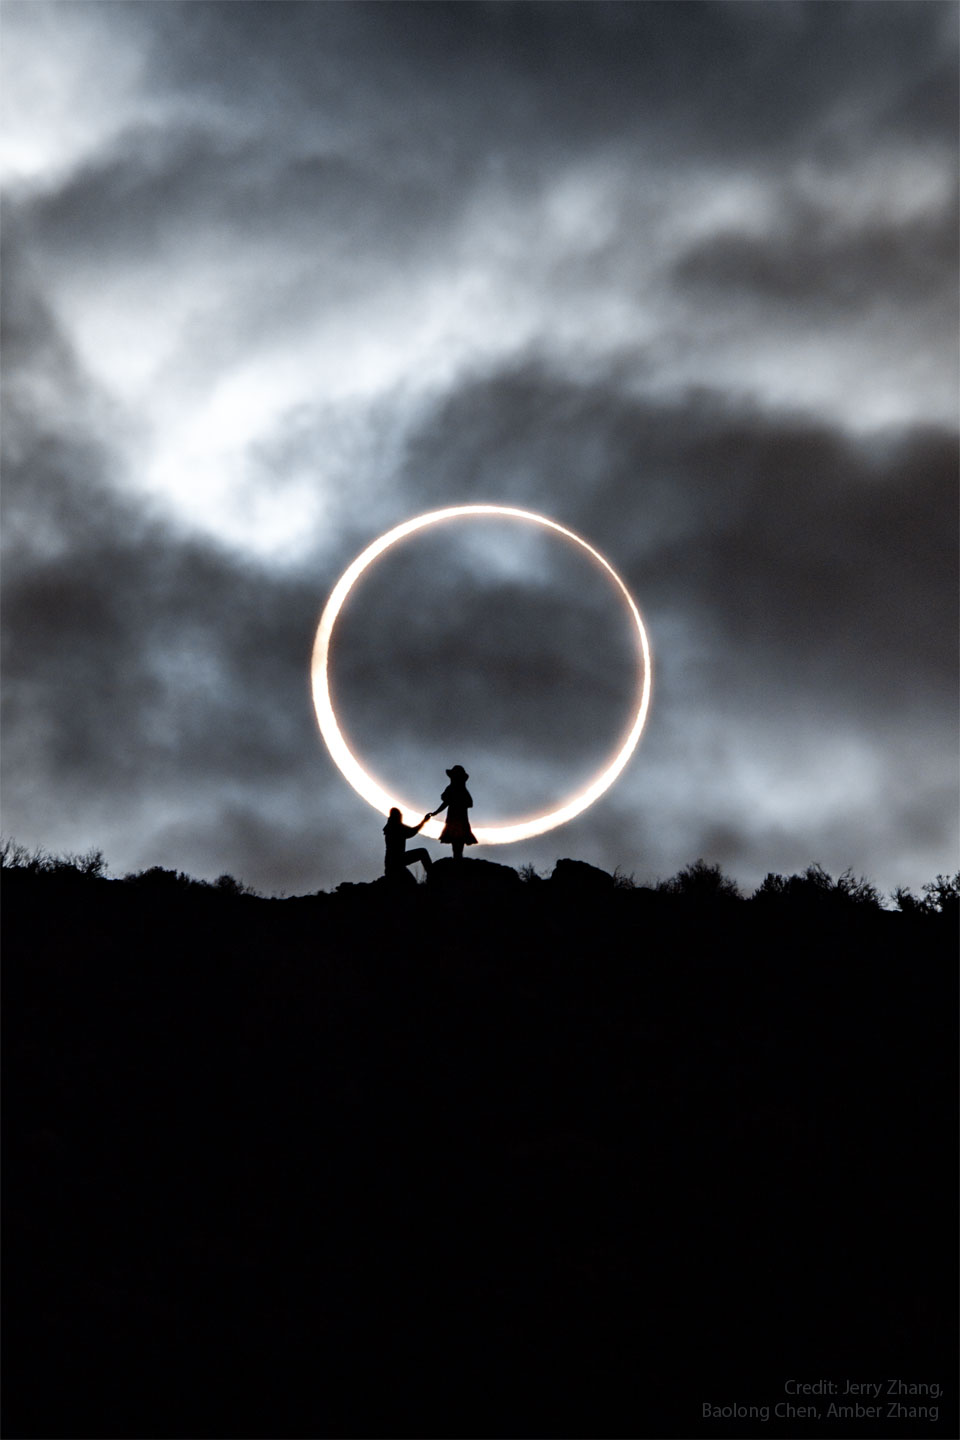 An annular solar eclipse appears in the background with
the dark Moon appearing completely internal to the bright Sun.
In the foreground is a ridge with the silhouettes of two people, 
one standing, and one kneeling. 
Please see the explanation for more detailed information.